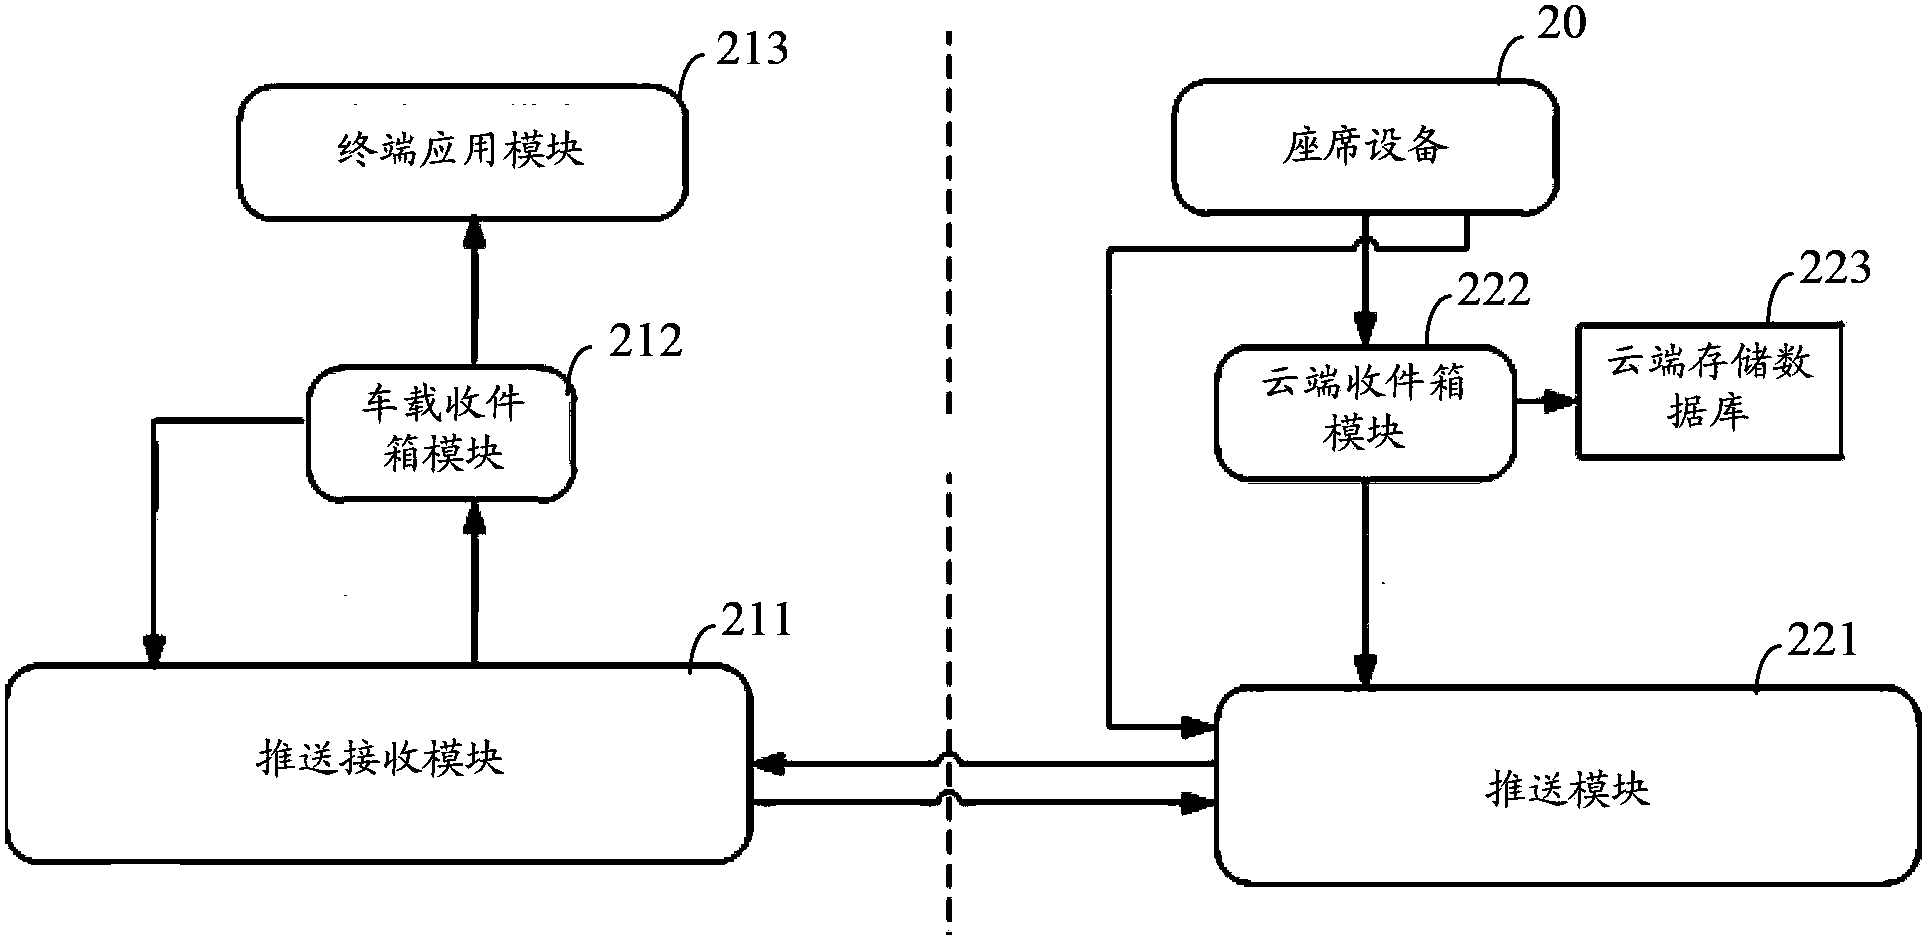 Navigation information issuing method and system